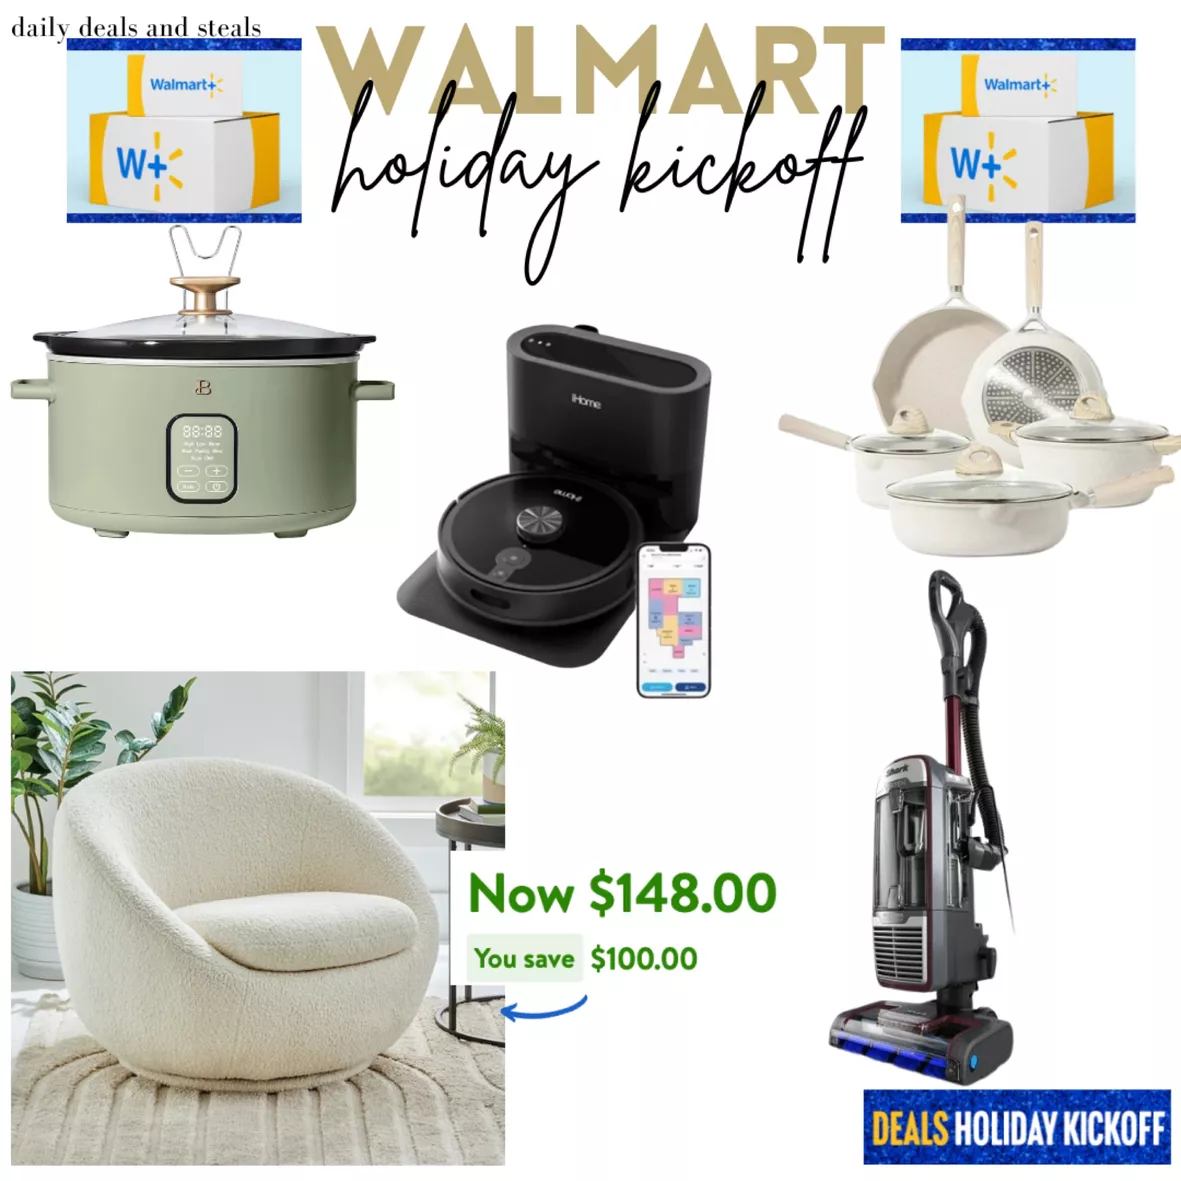 Walmart Deals Holiday Kickoff is here! I grabbed the Carote